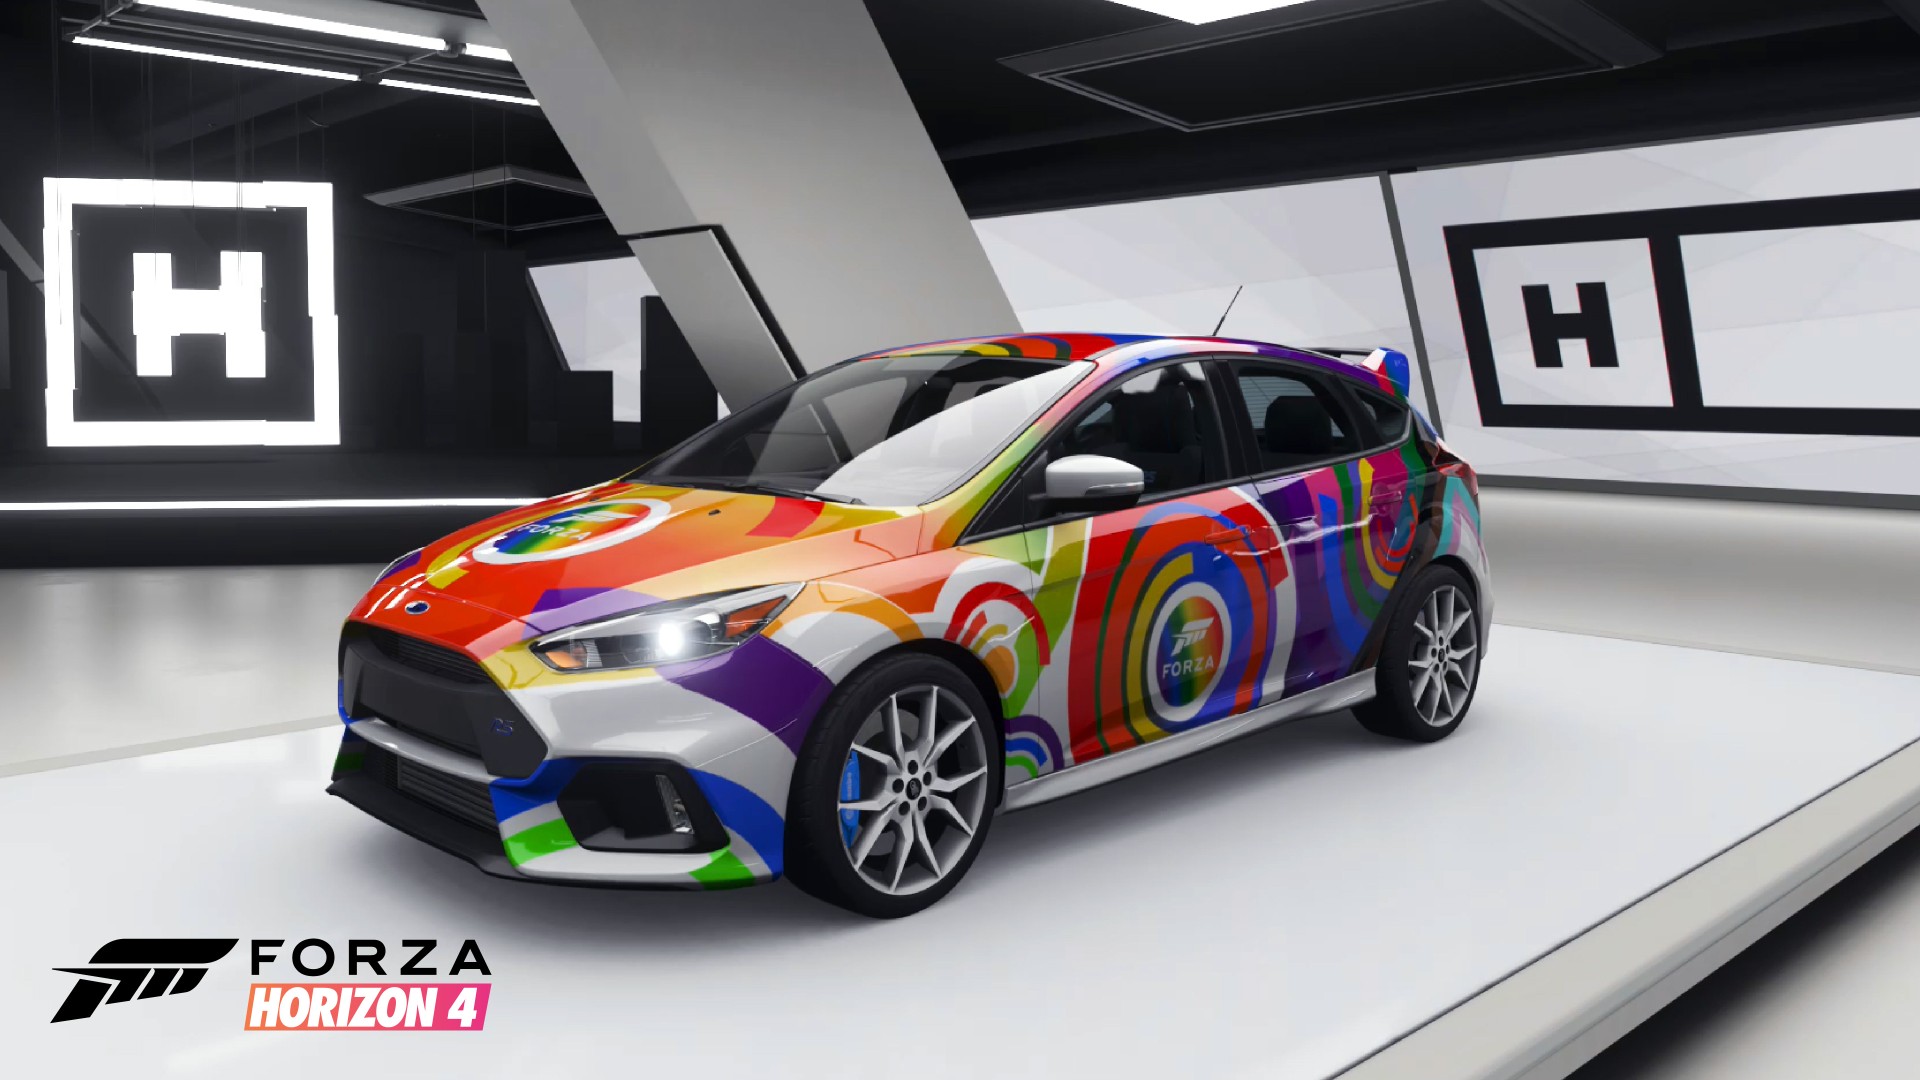 The 2017 Ford Focus RS, decorated with a colorful rainbow circle pattern, is parked at an angle facing the viewer in Forza Horizon 4.